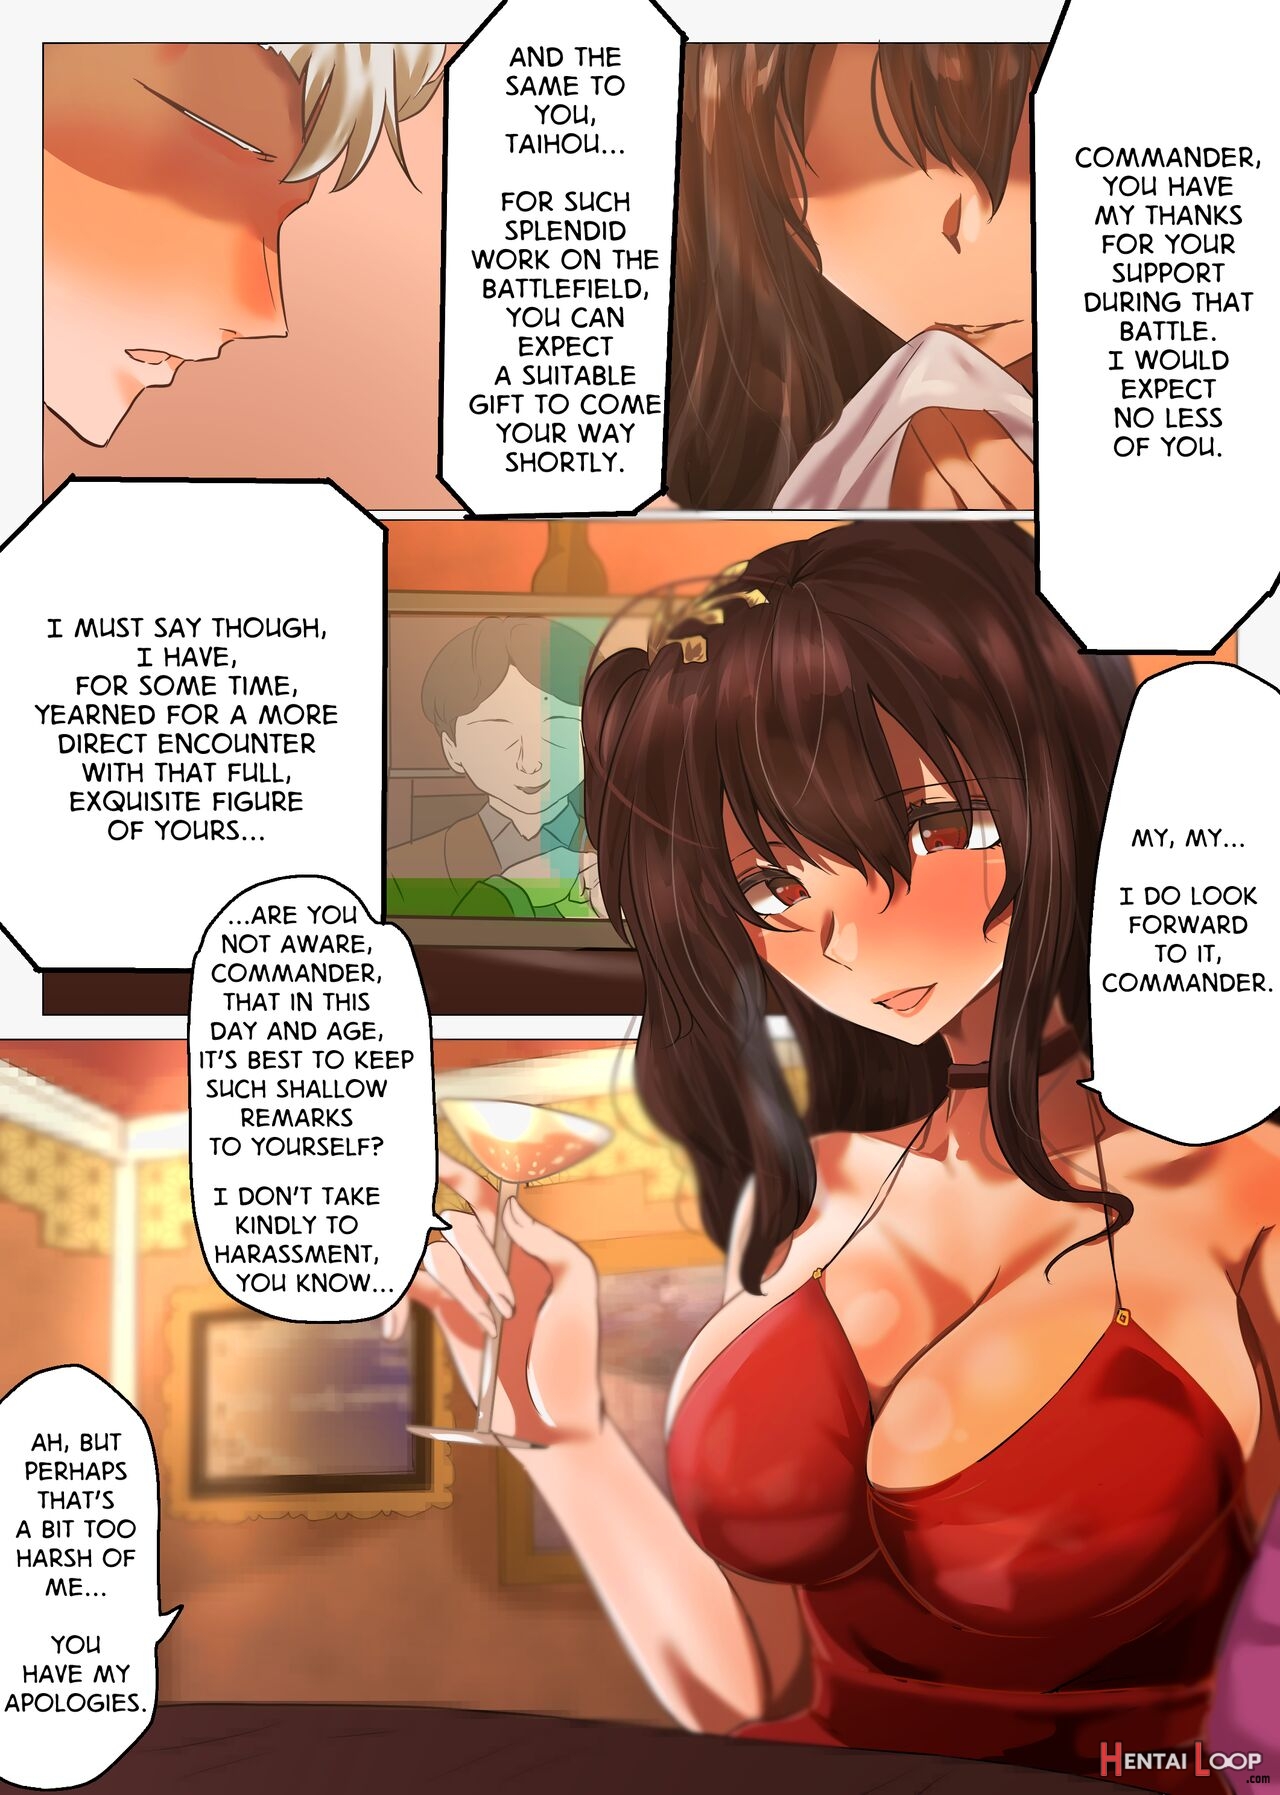 Taihou's Wild Dance Of Costumes page 2